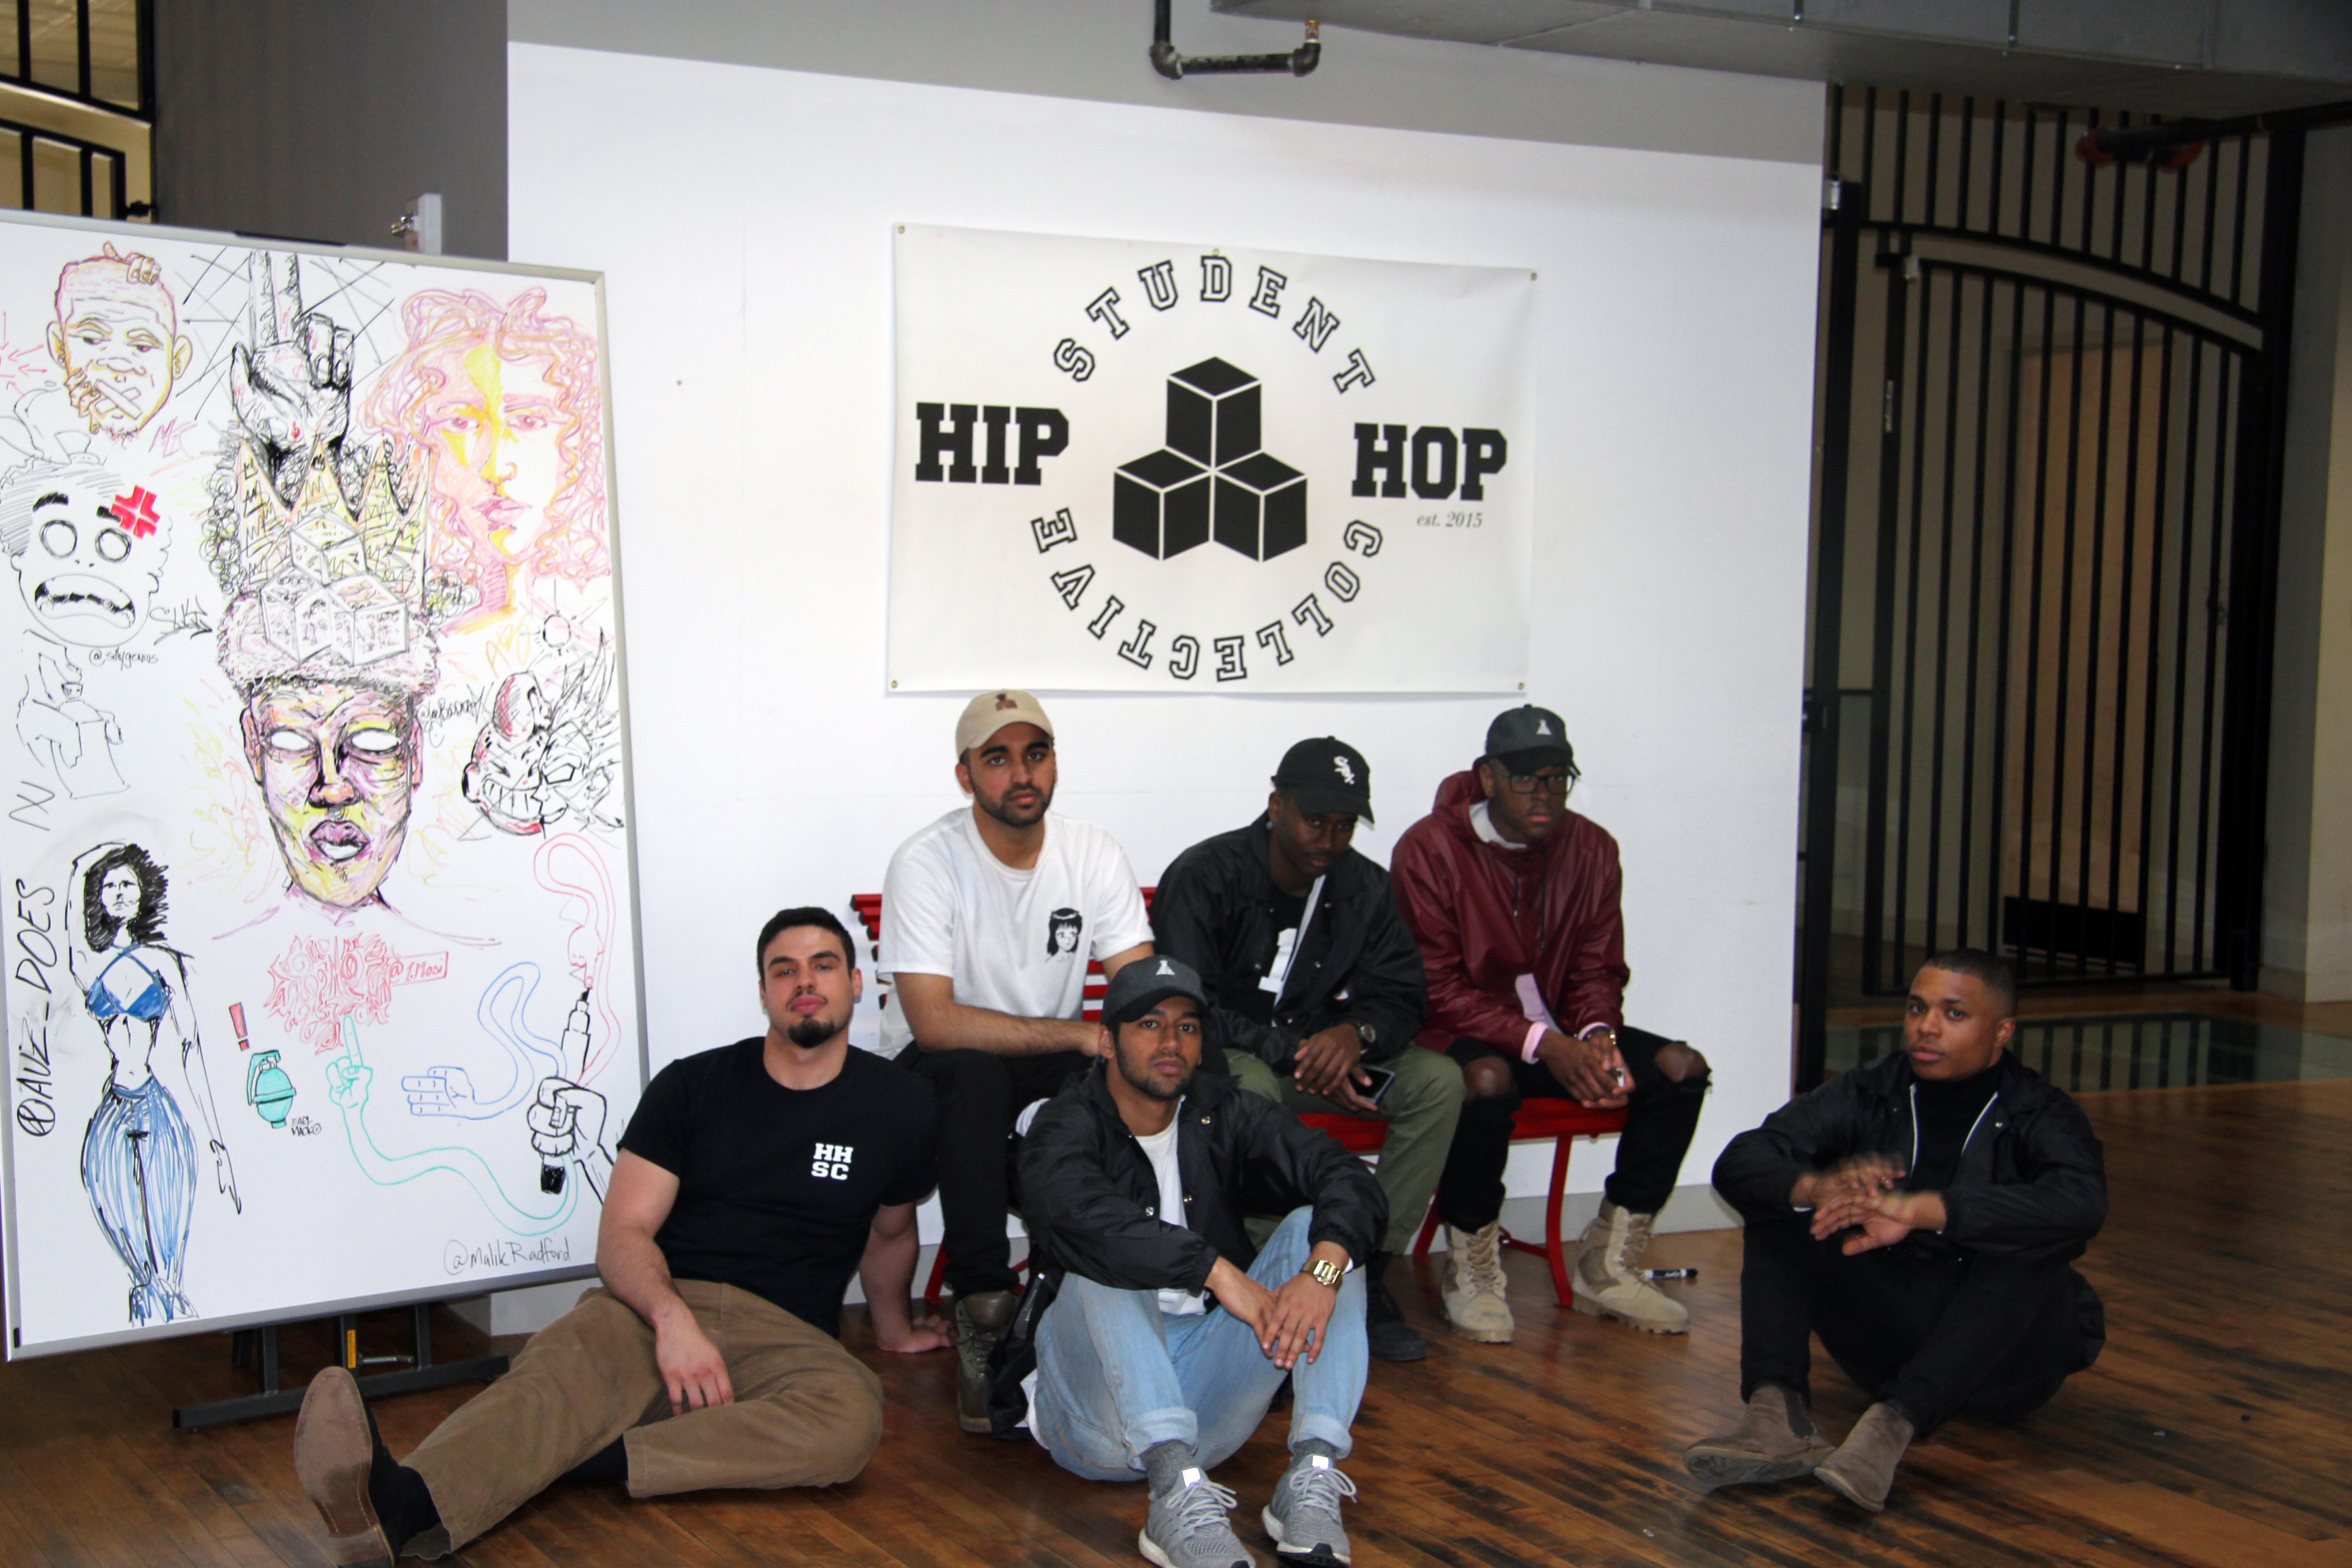 Ocular Prowess: An art show curated by VCU’s Hip-Hop Heads